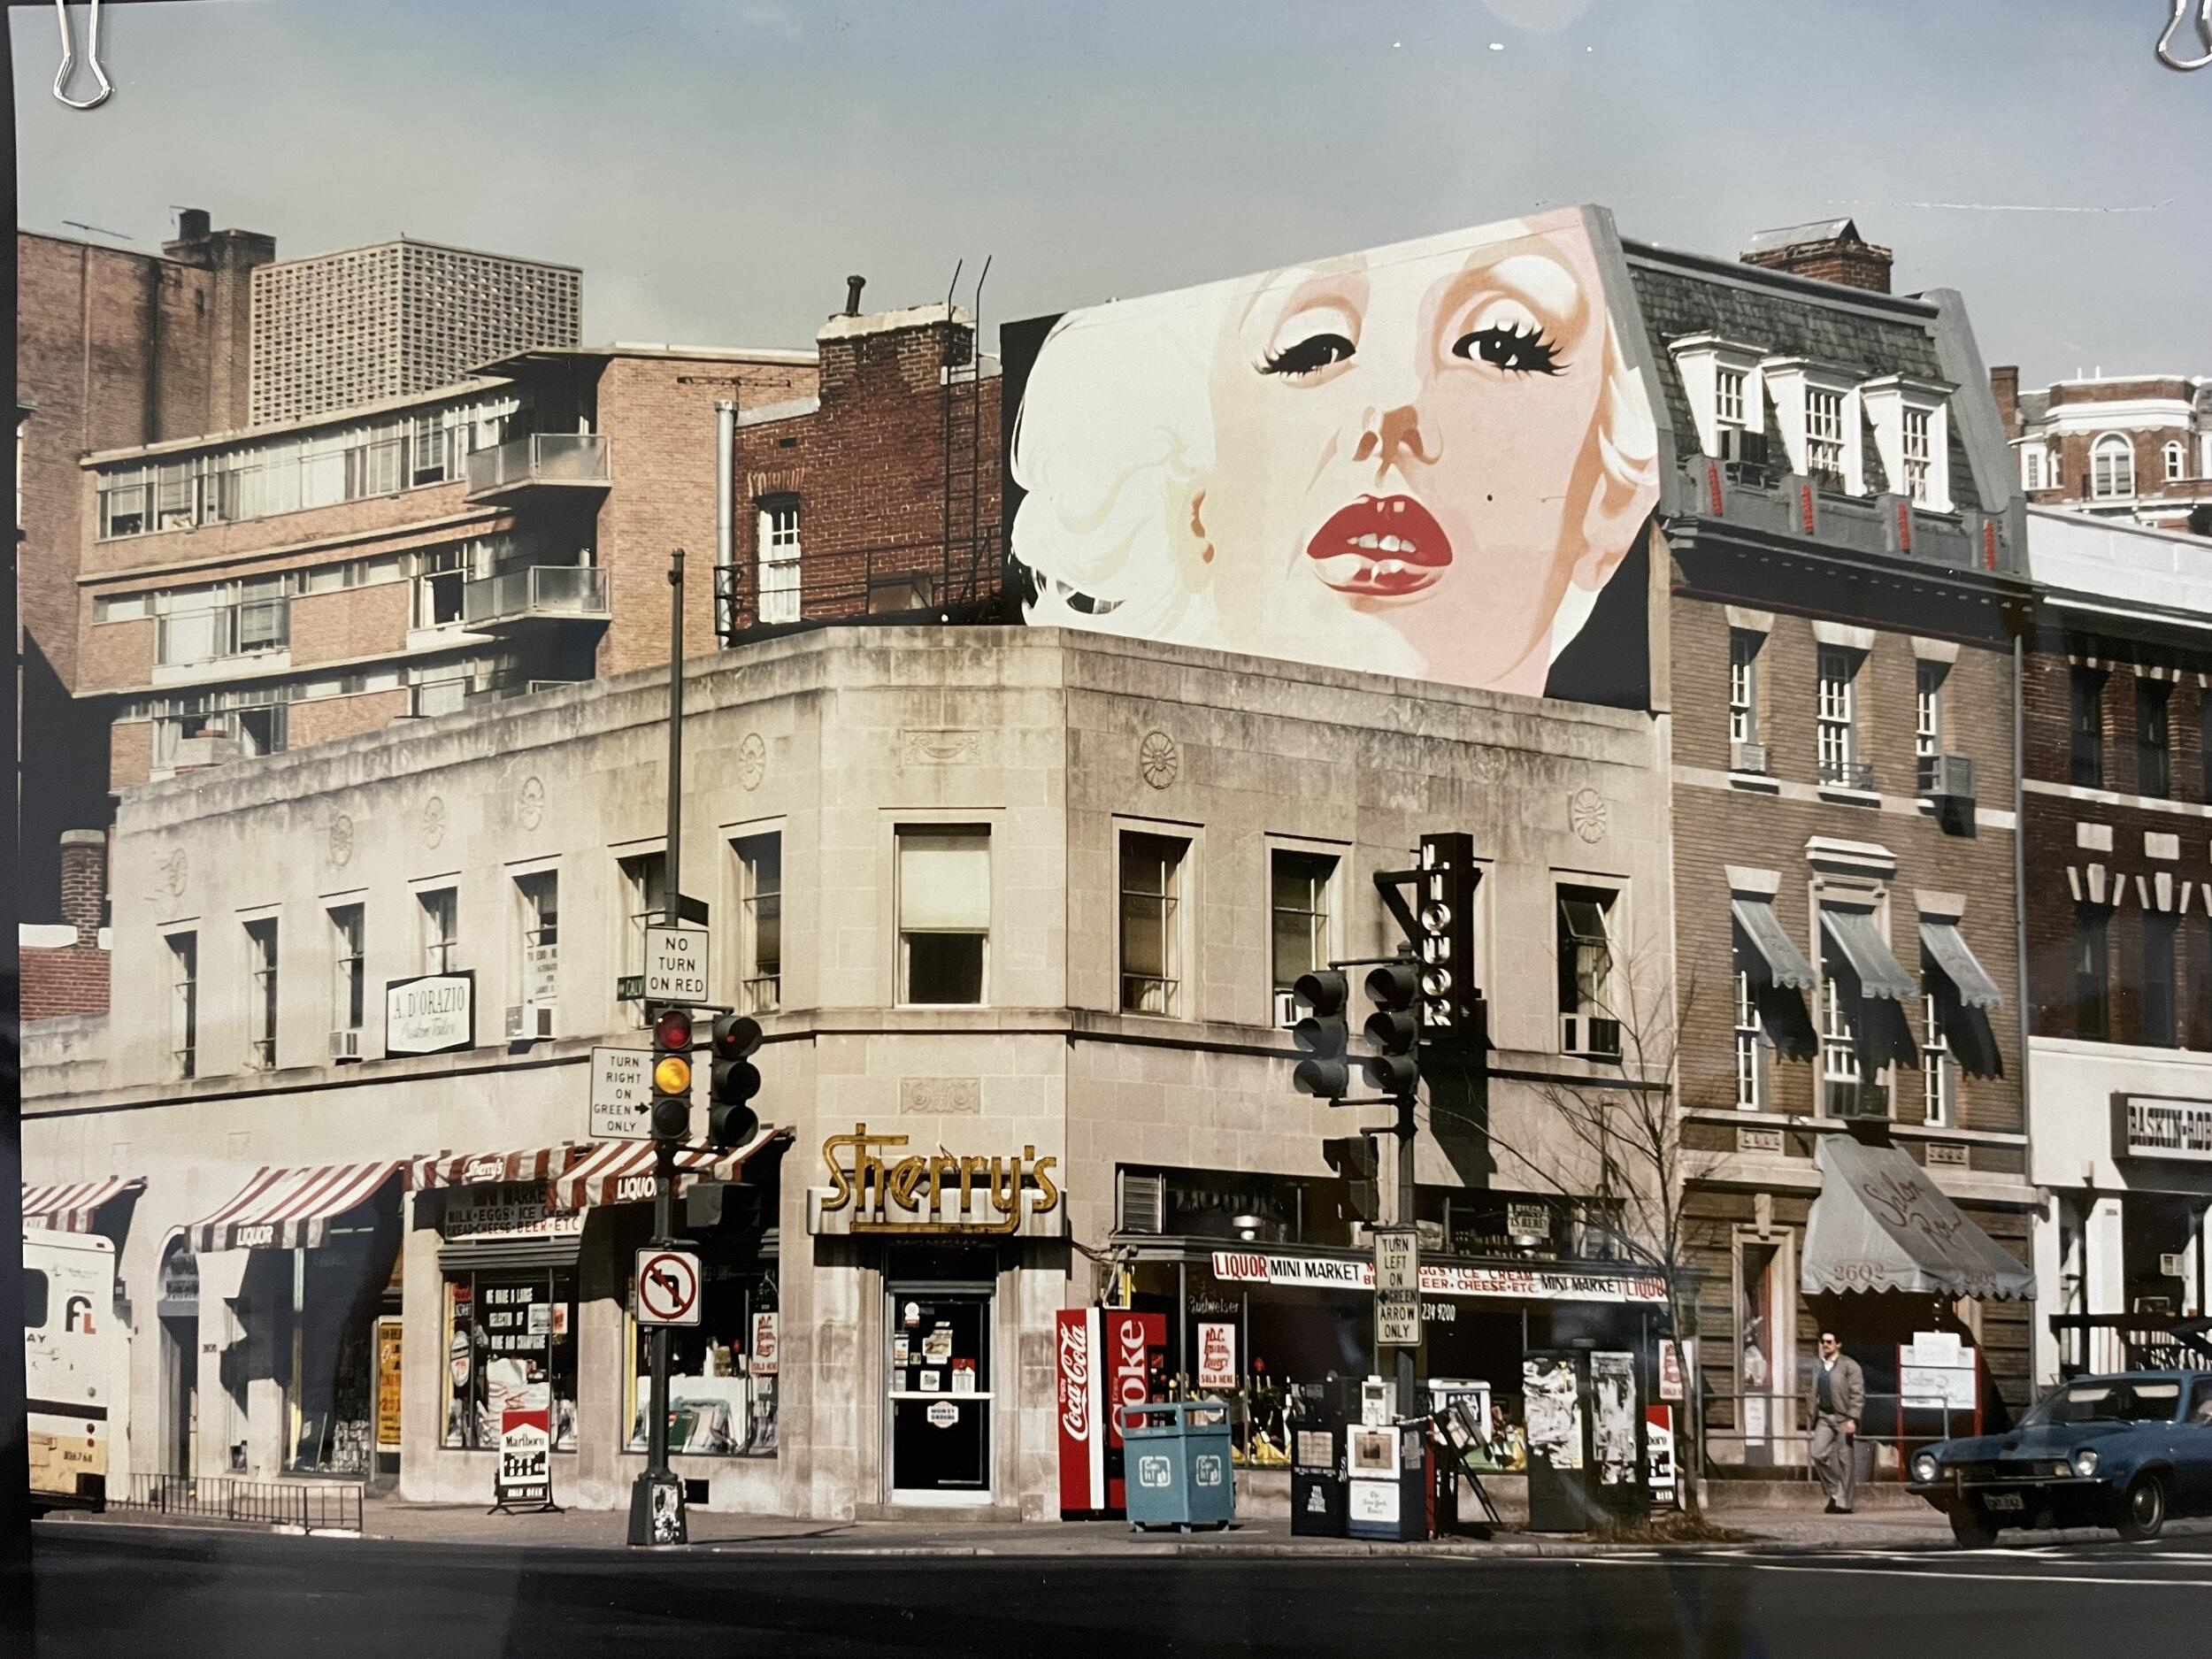 A photograph of John Bailey’s mural, “Marilyn,” painted on the exterior wall of Salon Roi